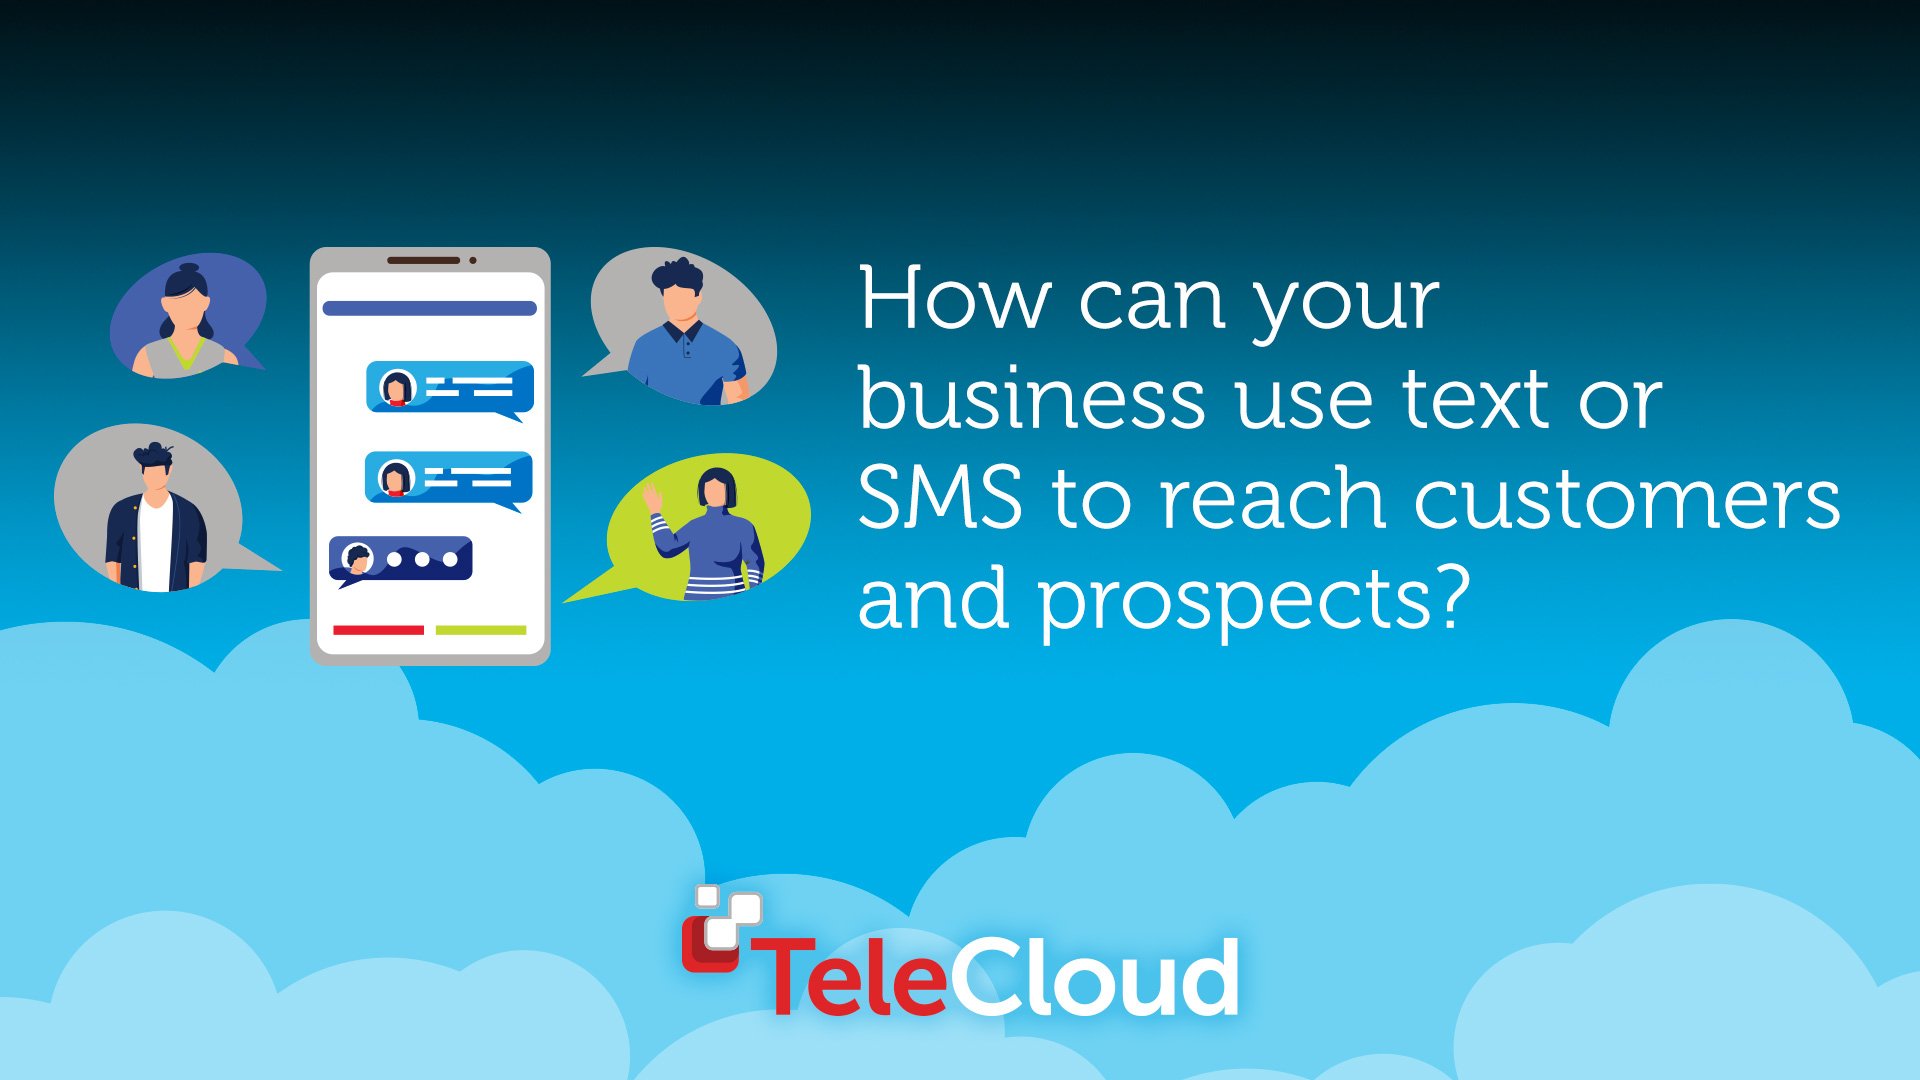 How Can Our Business Text Message Customers and Prospects?